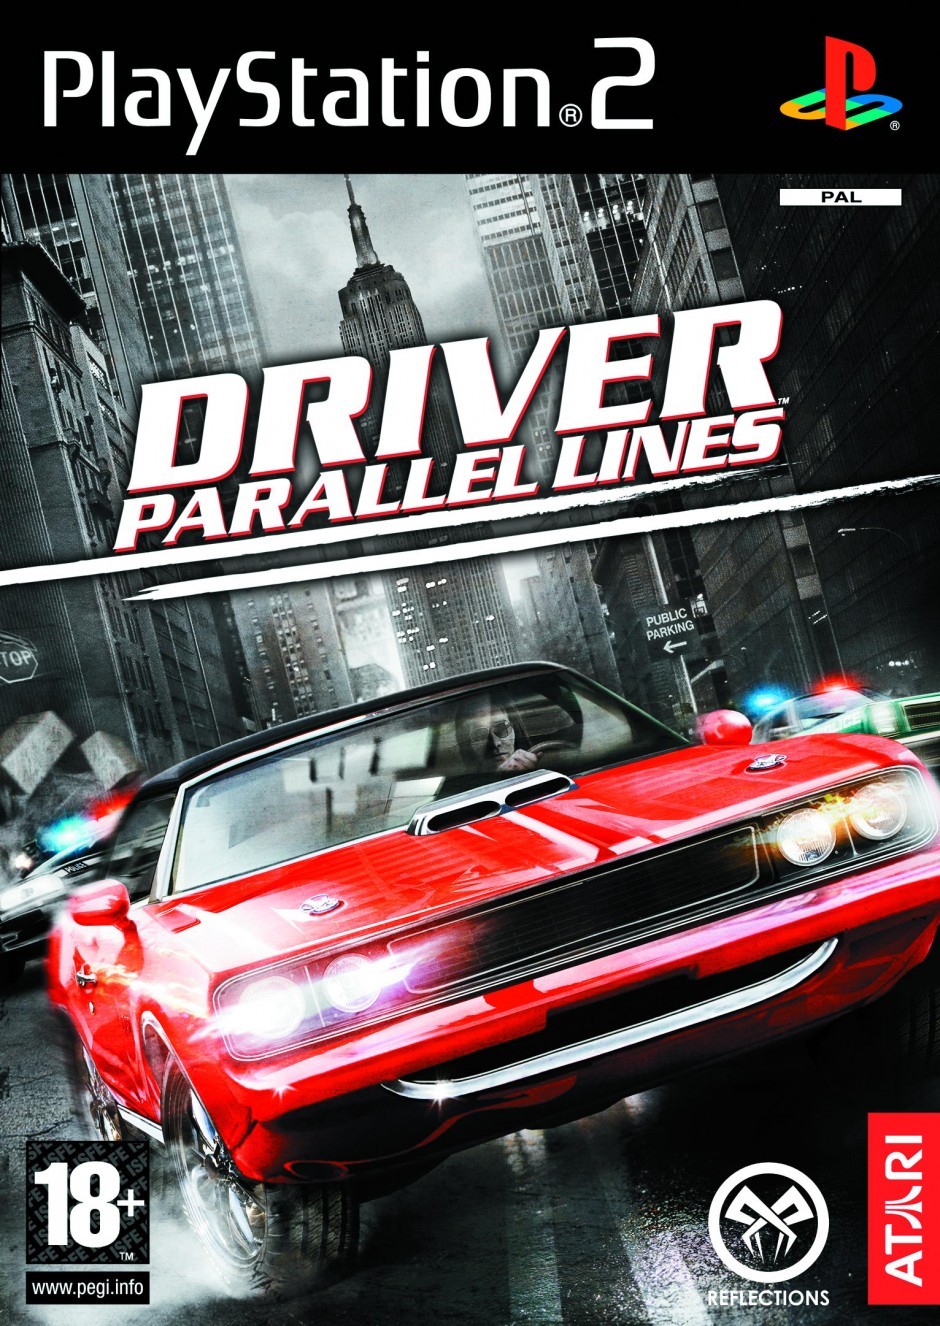 Driver Paralel Lines Cheat Codes